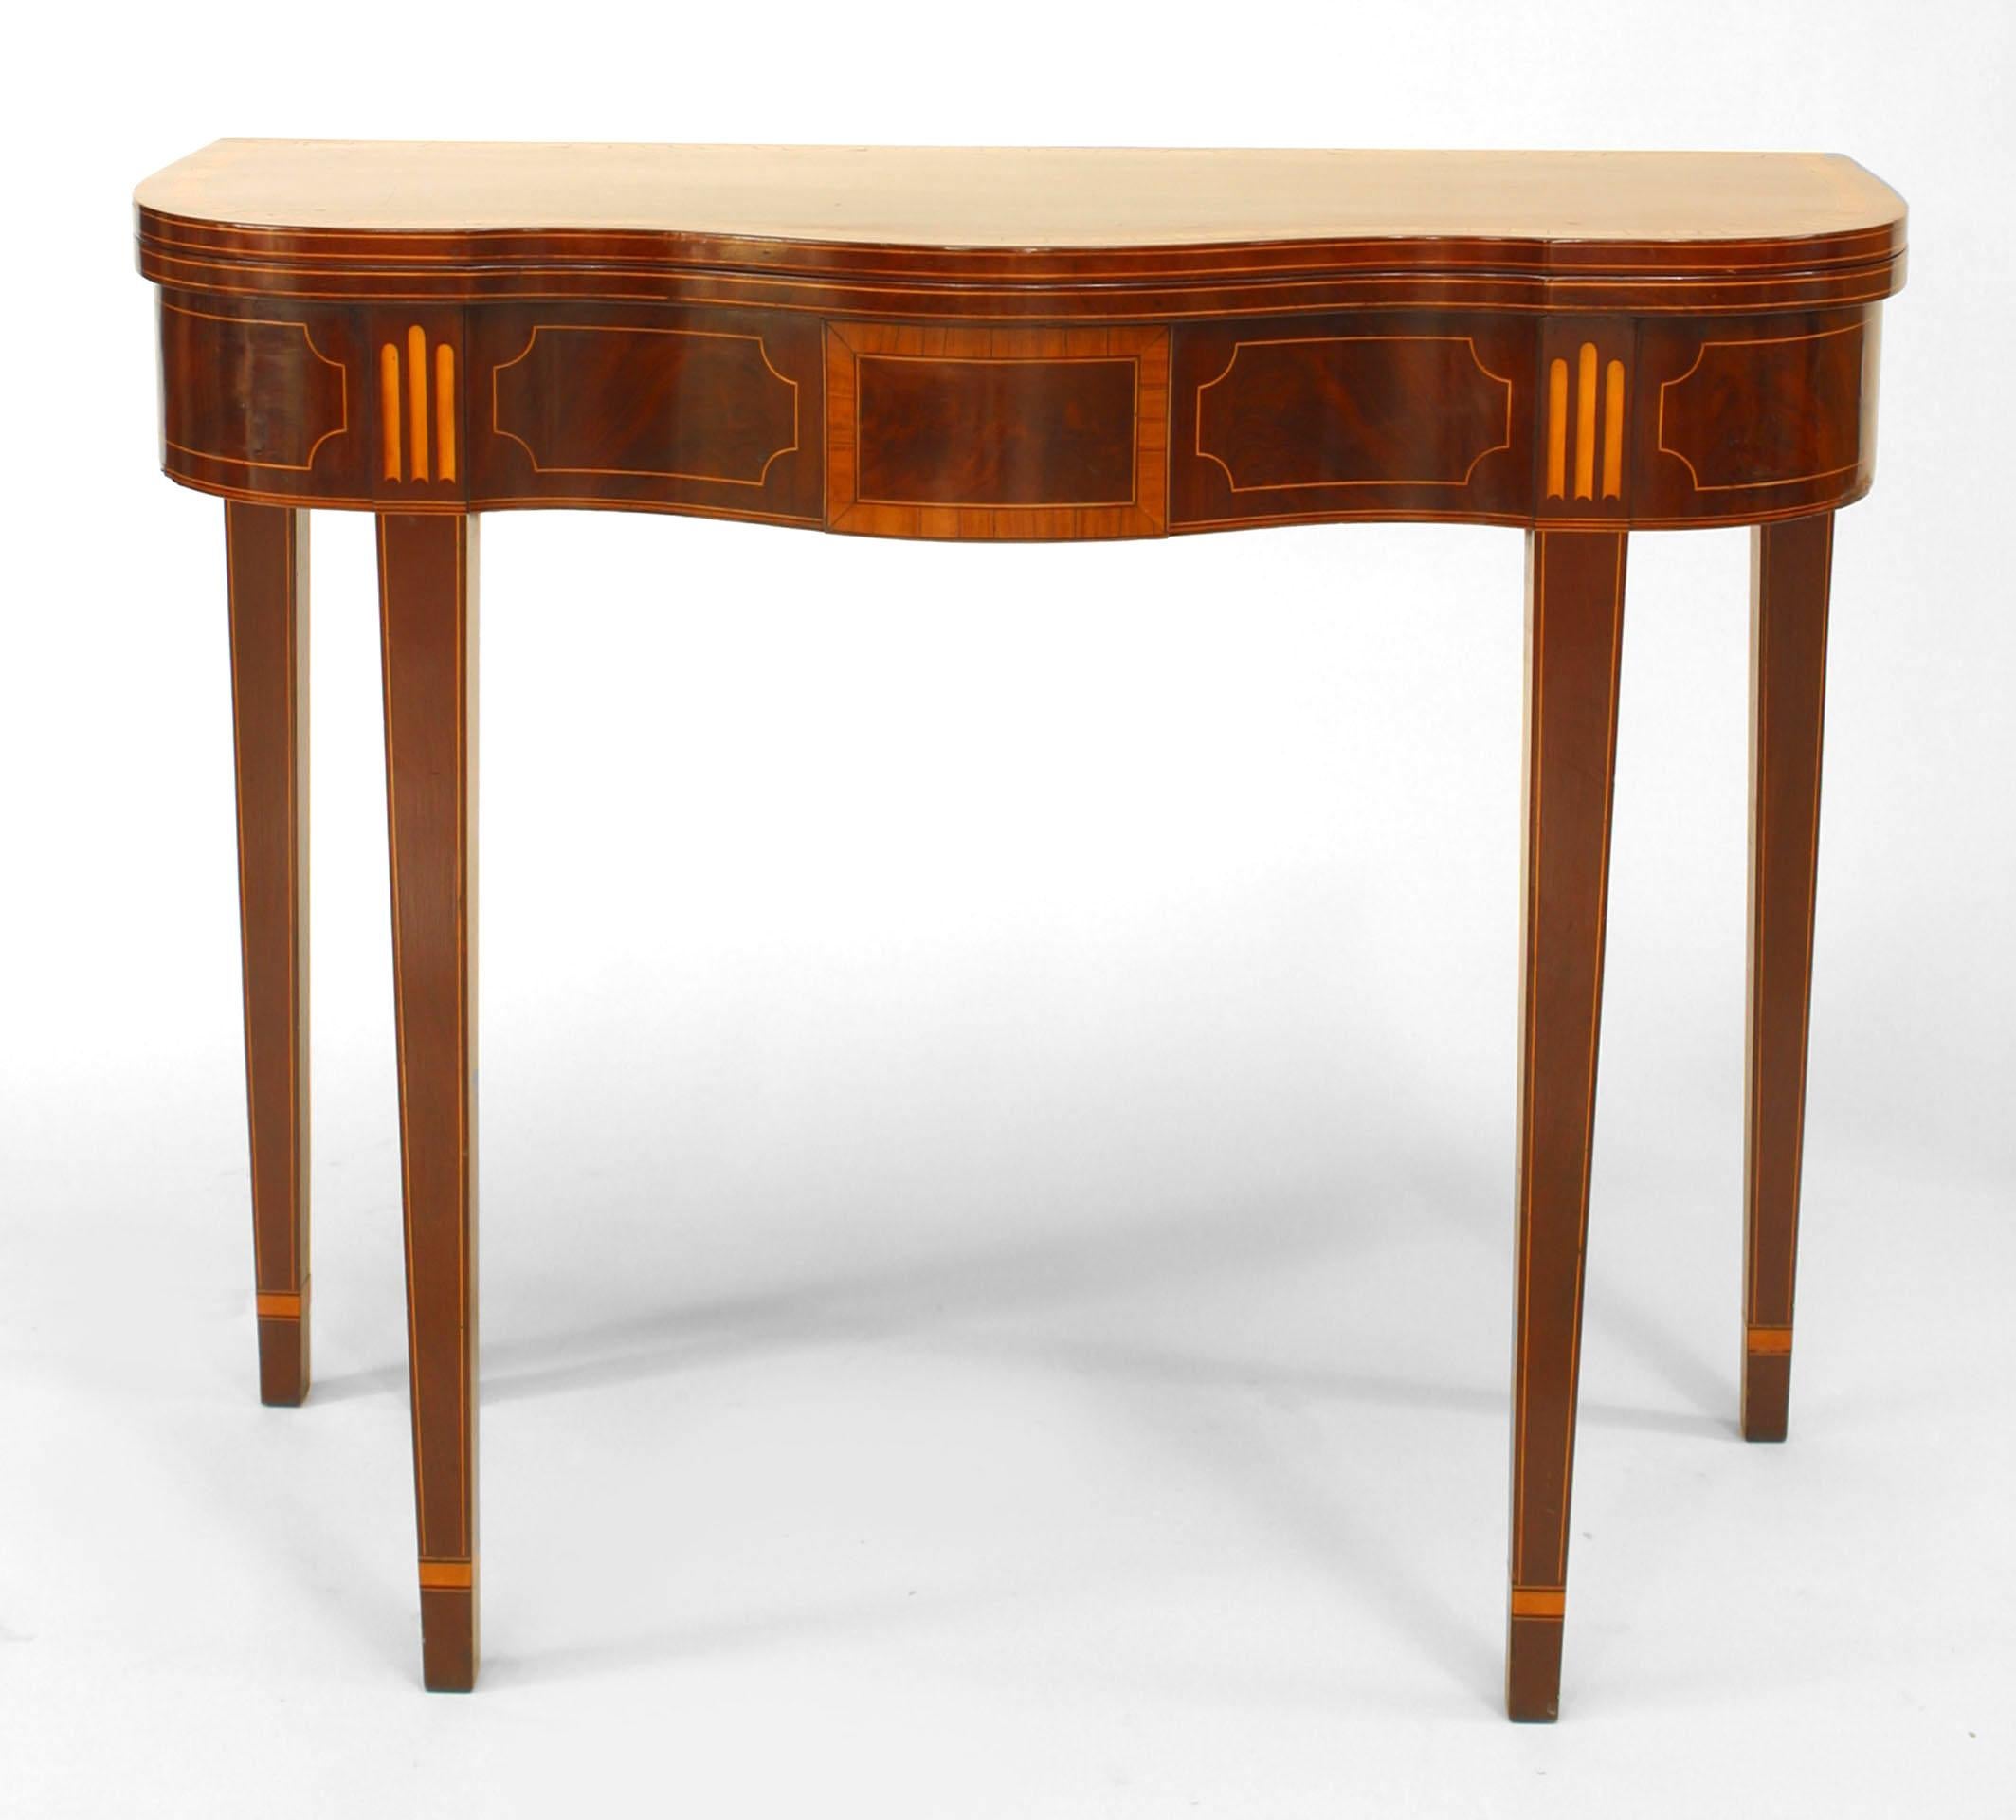 English Sheraton (18th-19th century) mahogany flip-top console card table with shaped bow front and satinwood banding and inlay on top and apron.
 